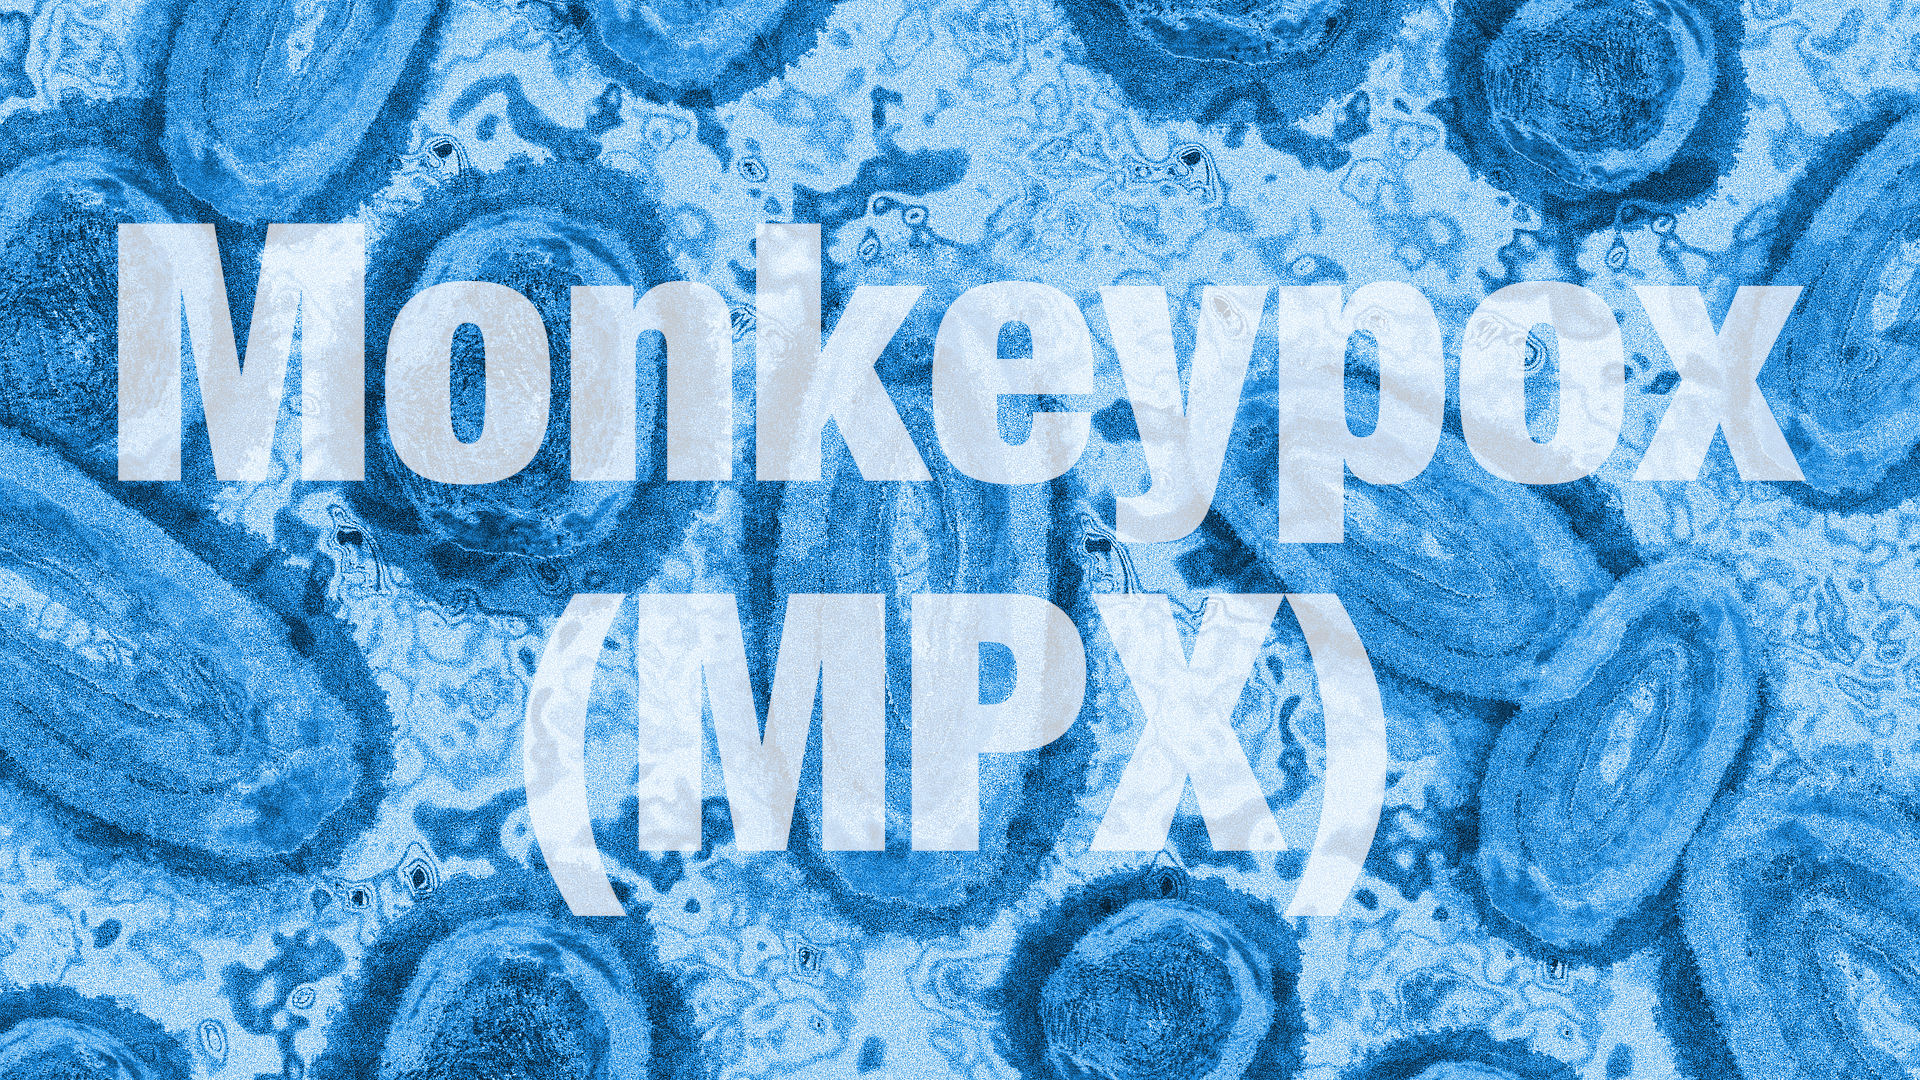 An artistic representation of the monkeypox virus on a blue background